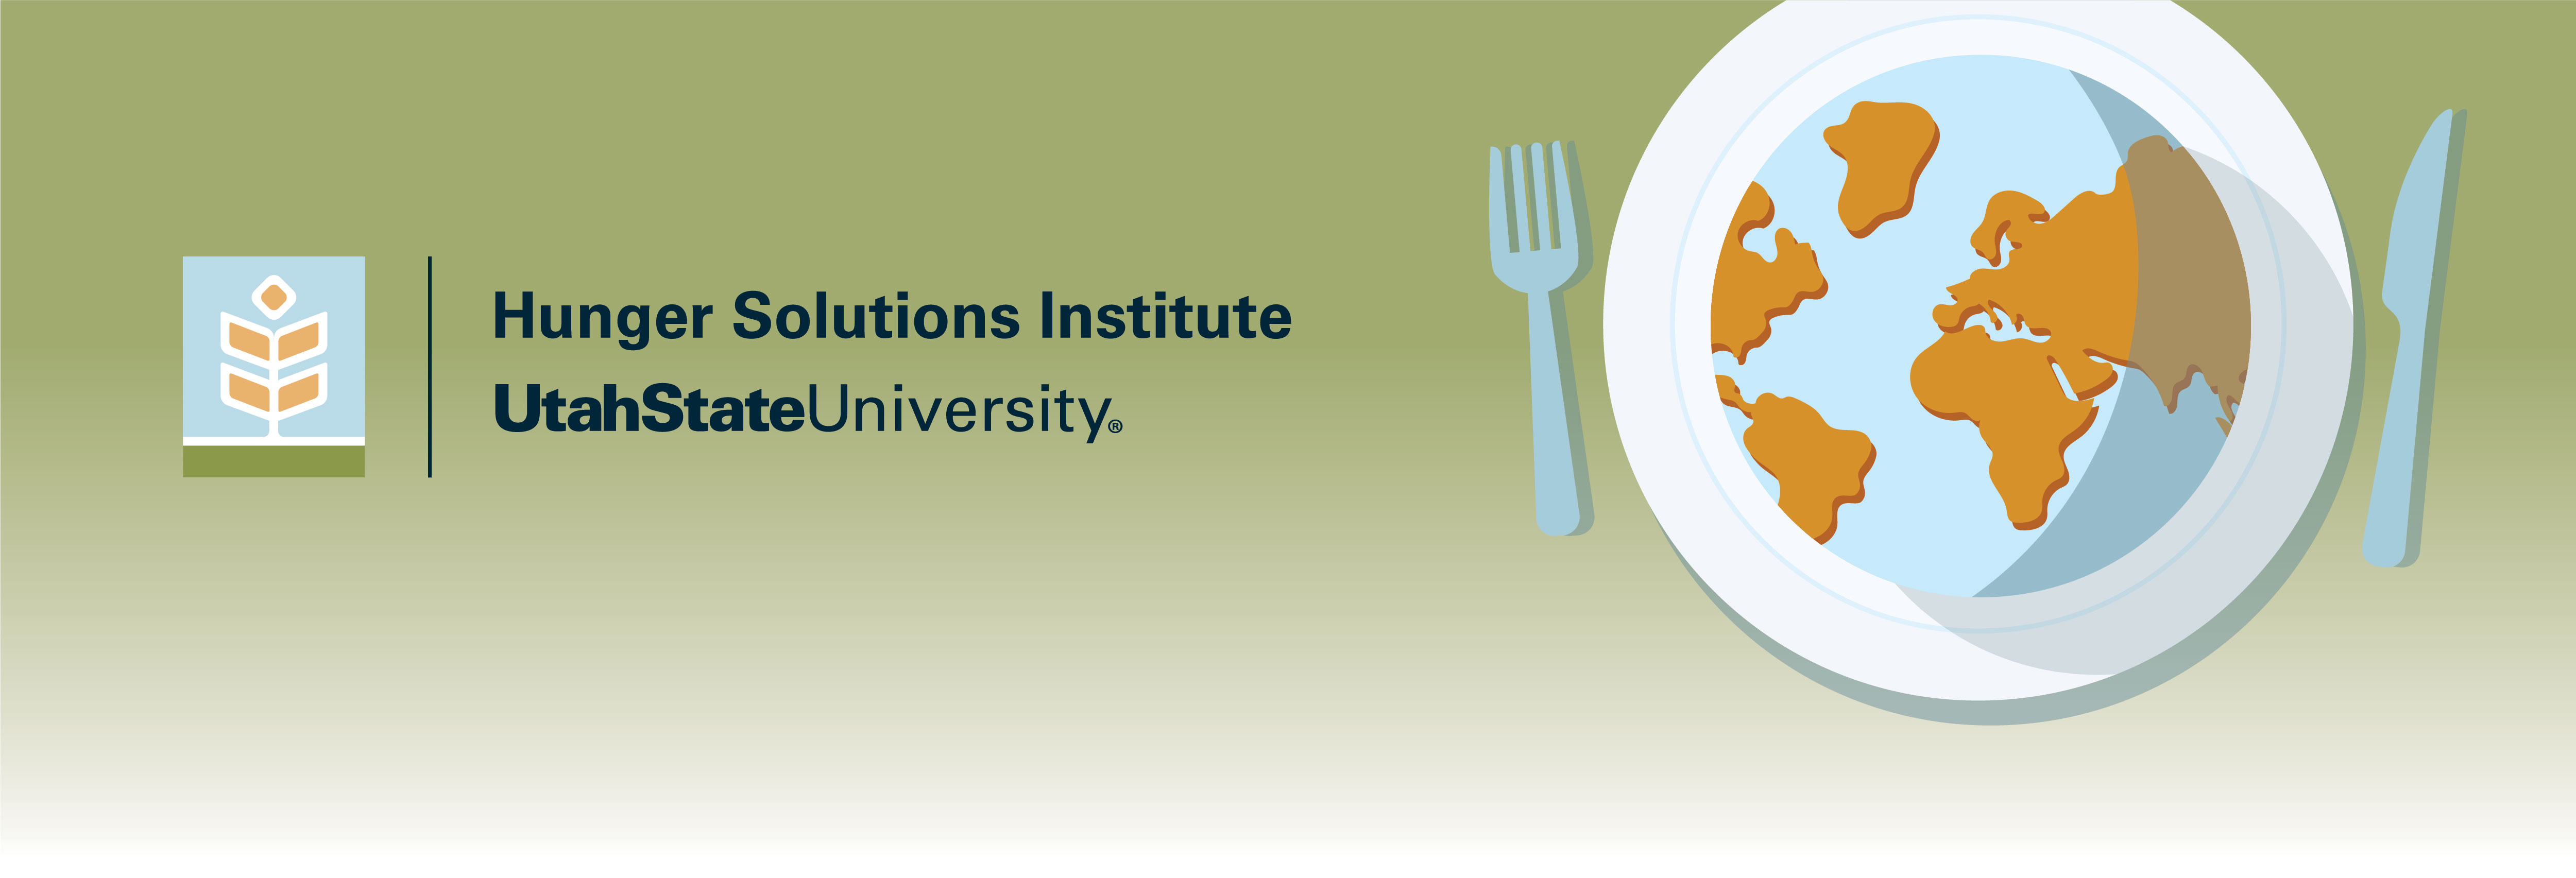 Hunger Solutions Institute